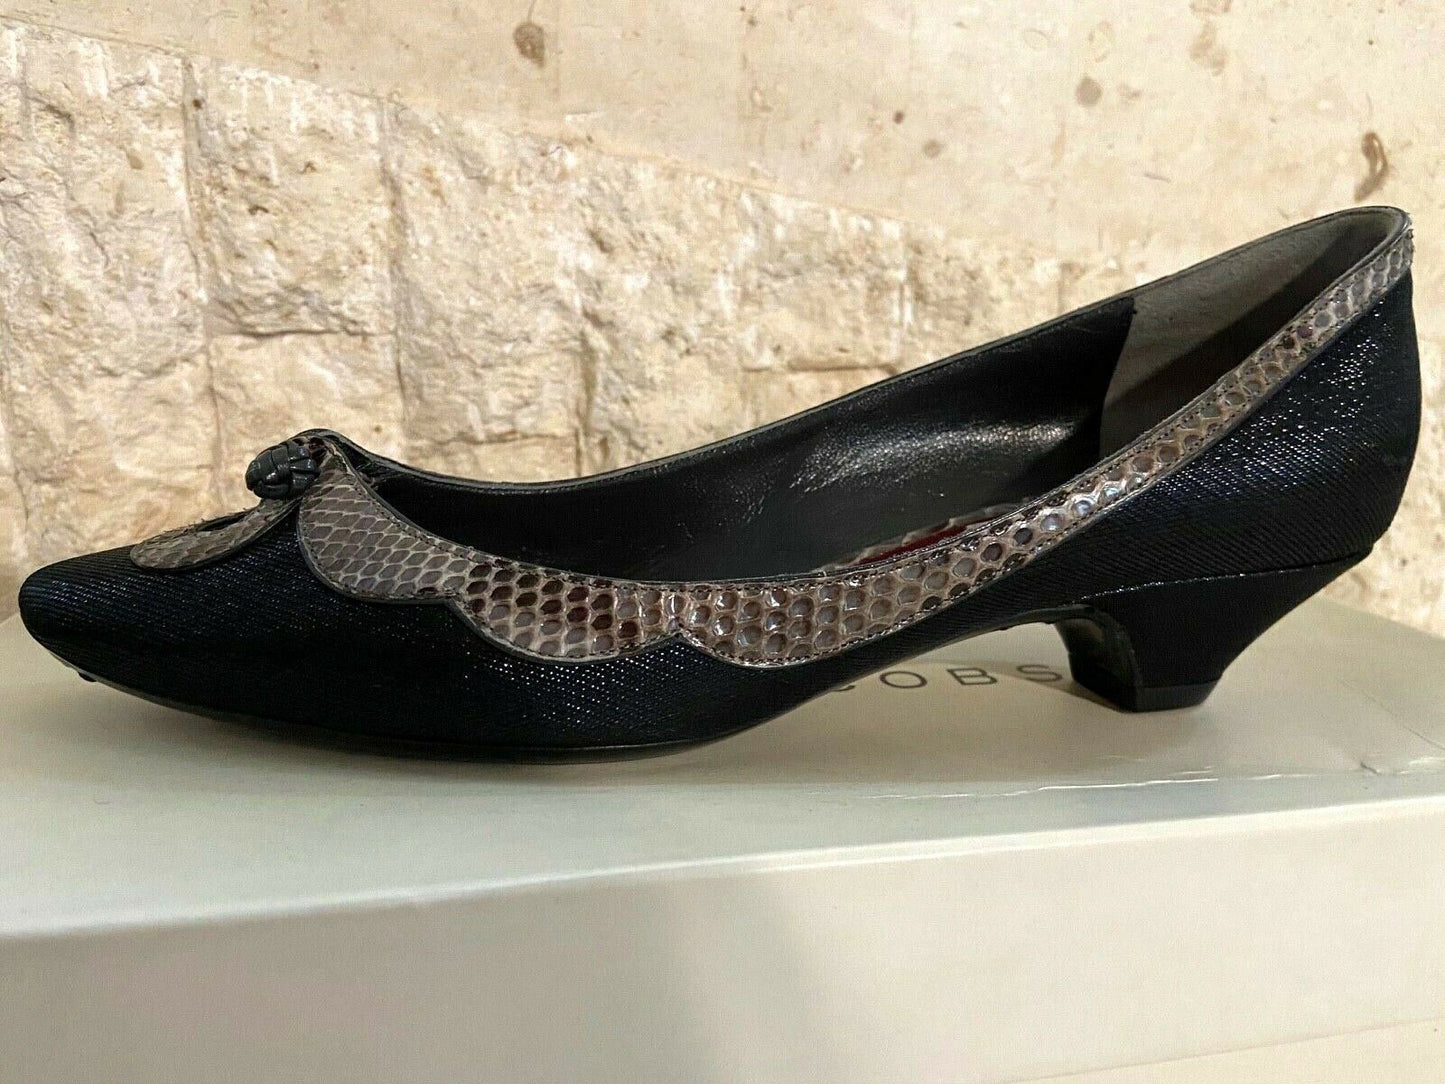 Marc Jacobs Black Low Heeled Toe Cut Out Slipper Court Shoes UK 3.5 US 6 EU 36 Timeless Fashions